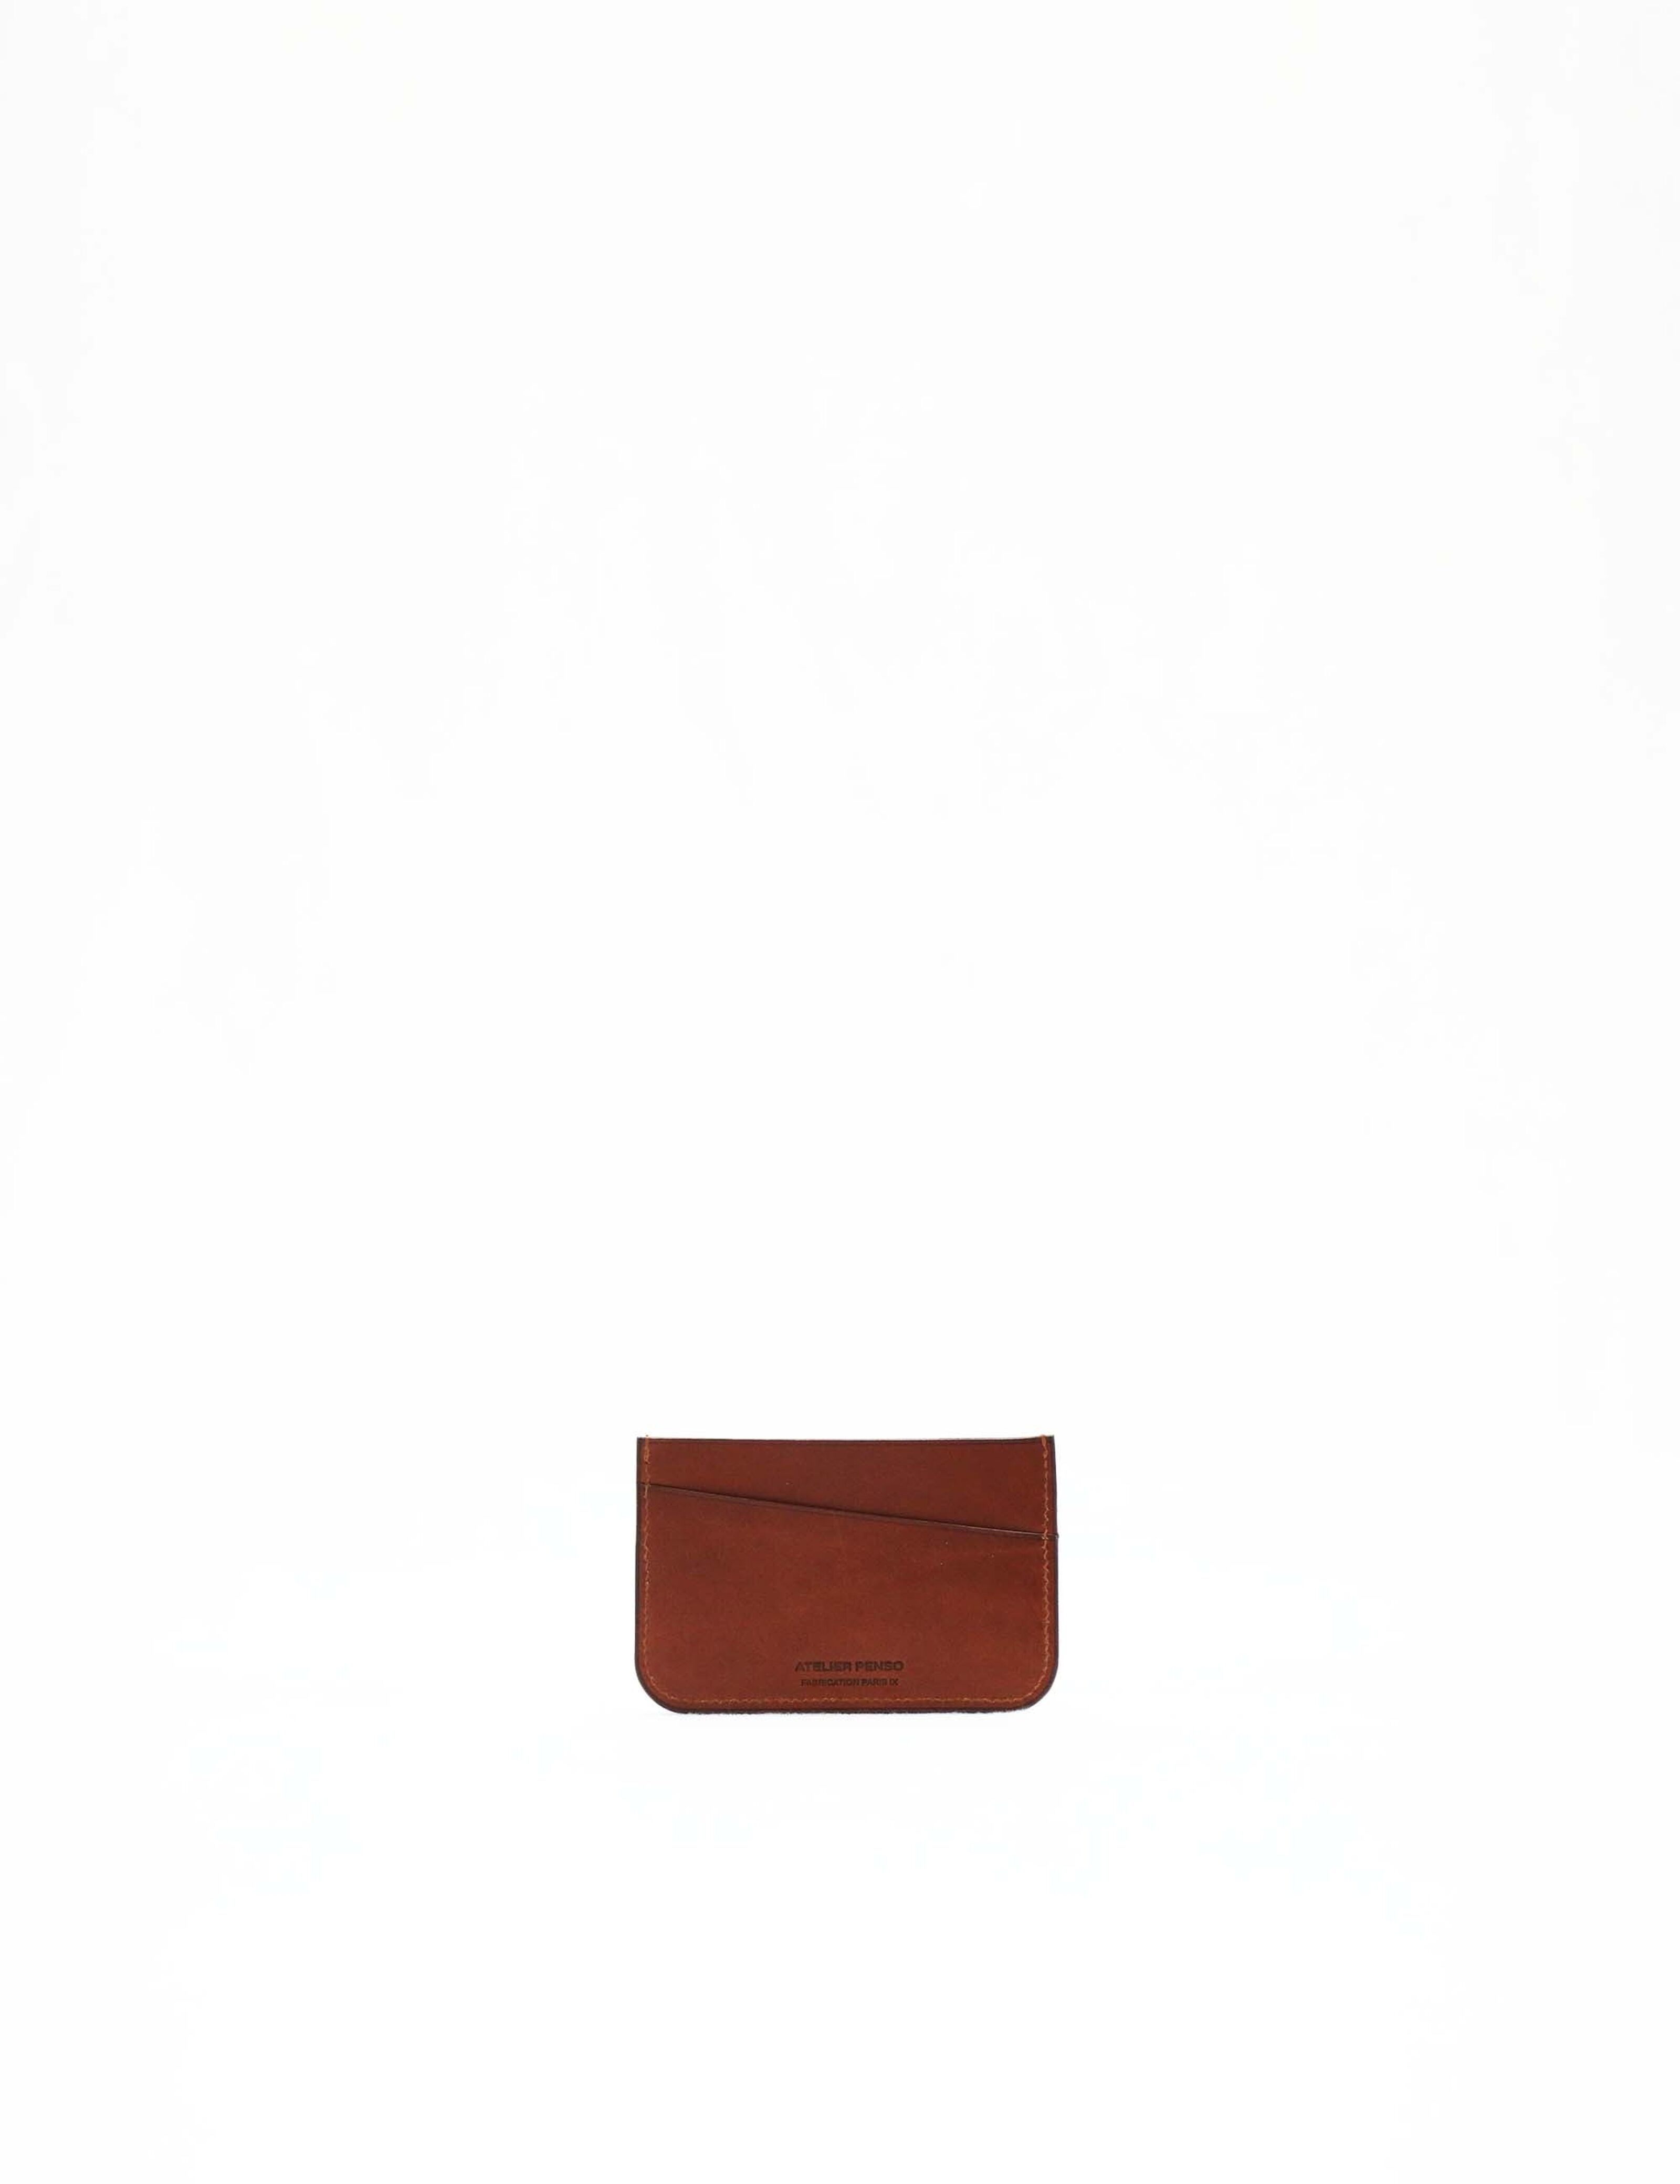 Card Holder - Orange Smooth Leather – Ateliers Auguste